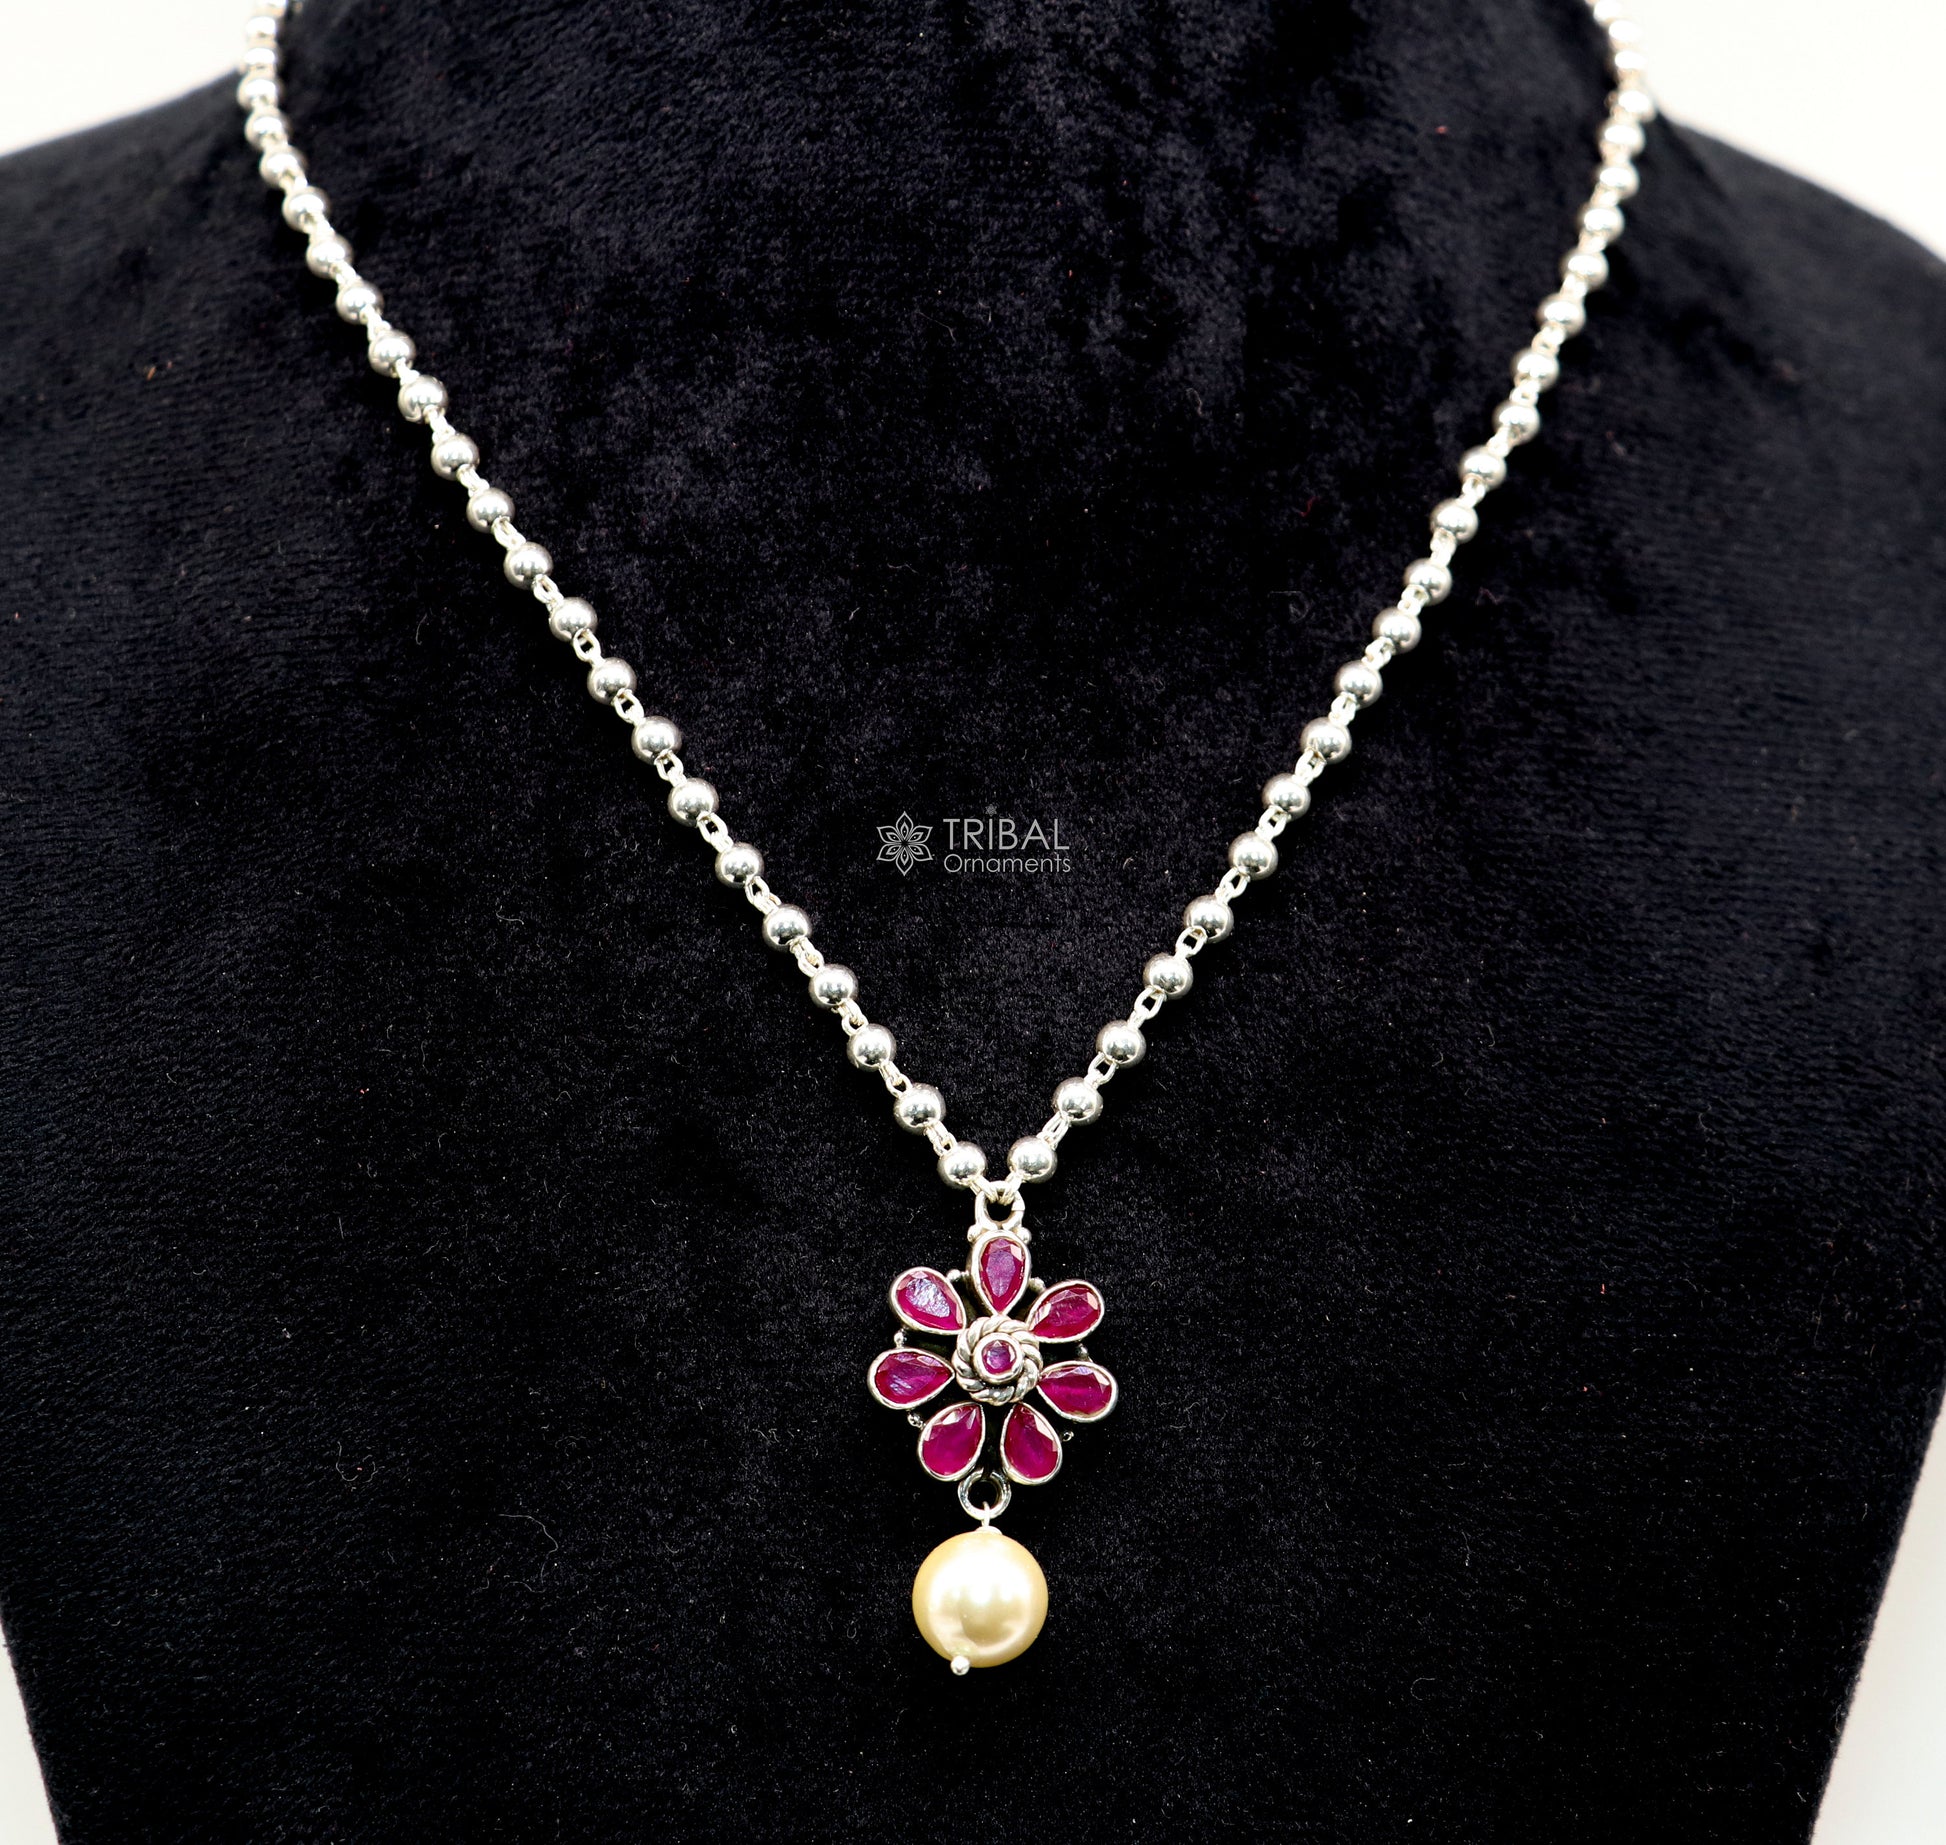 Traditional cultural trendy 925 sterling silver plain beads ball chain necklace with flower design pendant and hanging pearl jewelry set577 - TRIBAL ORNAMENTS